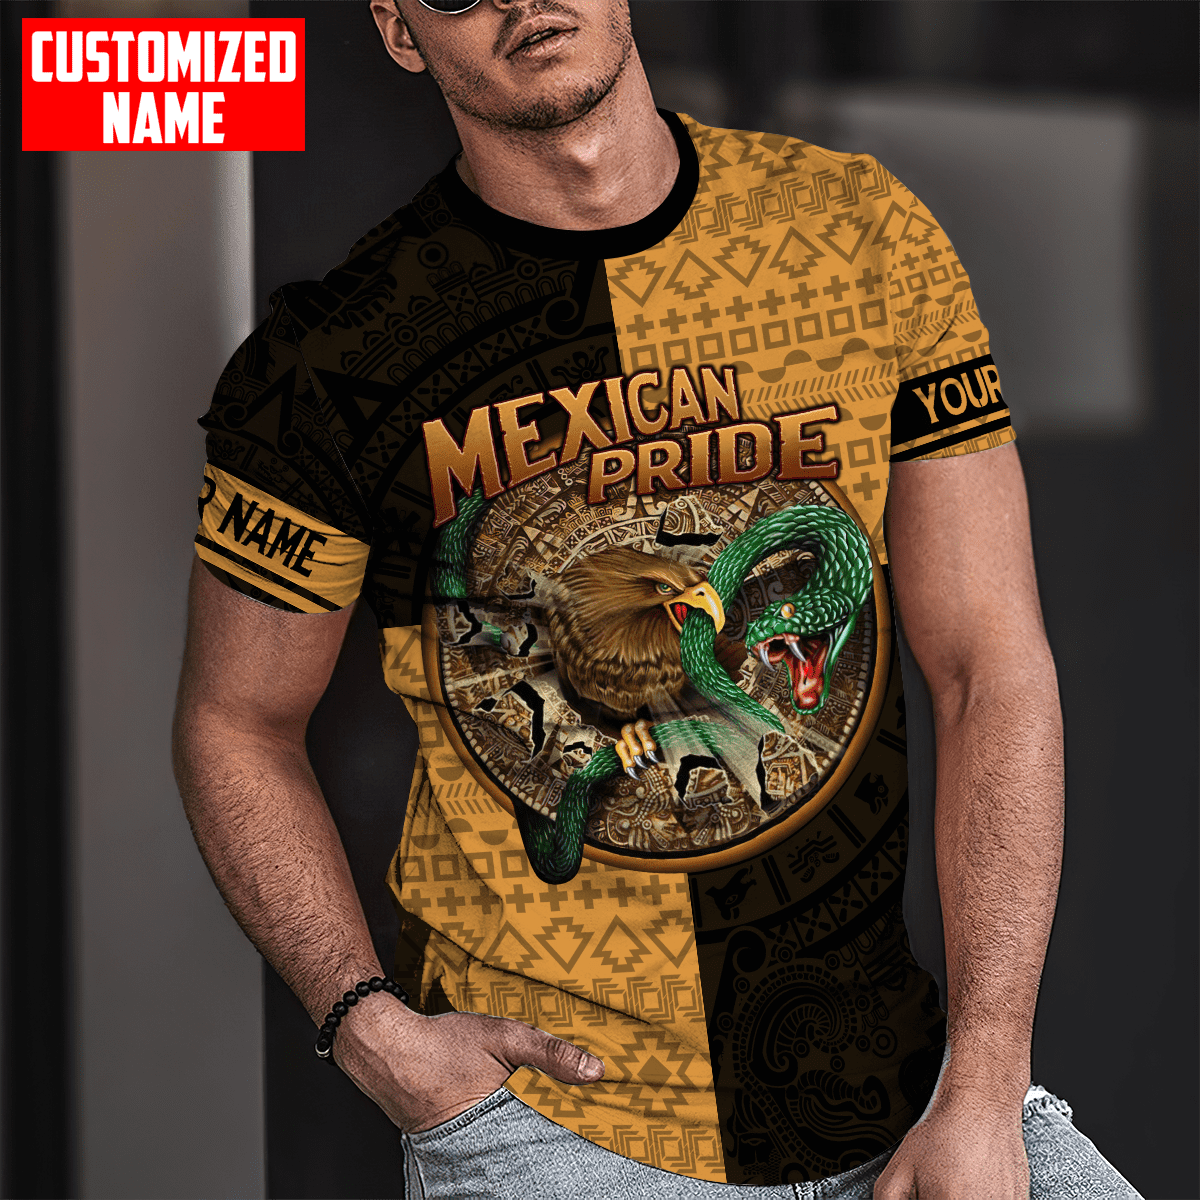 Personalized Name Mexican Pride Aztec Pattern Printed Unisex Shirts For Men Women